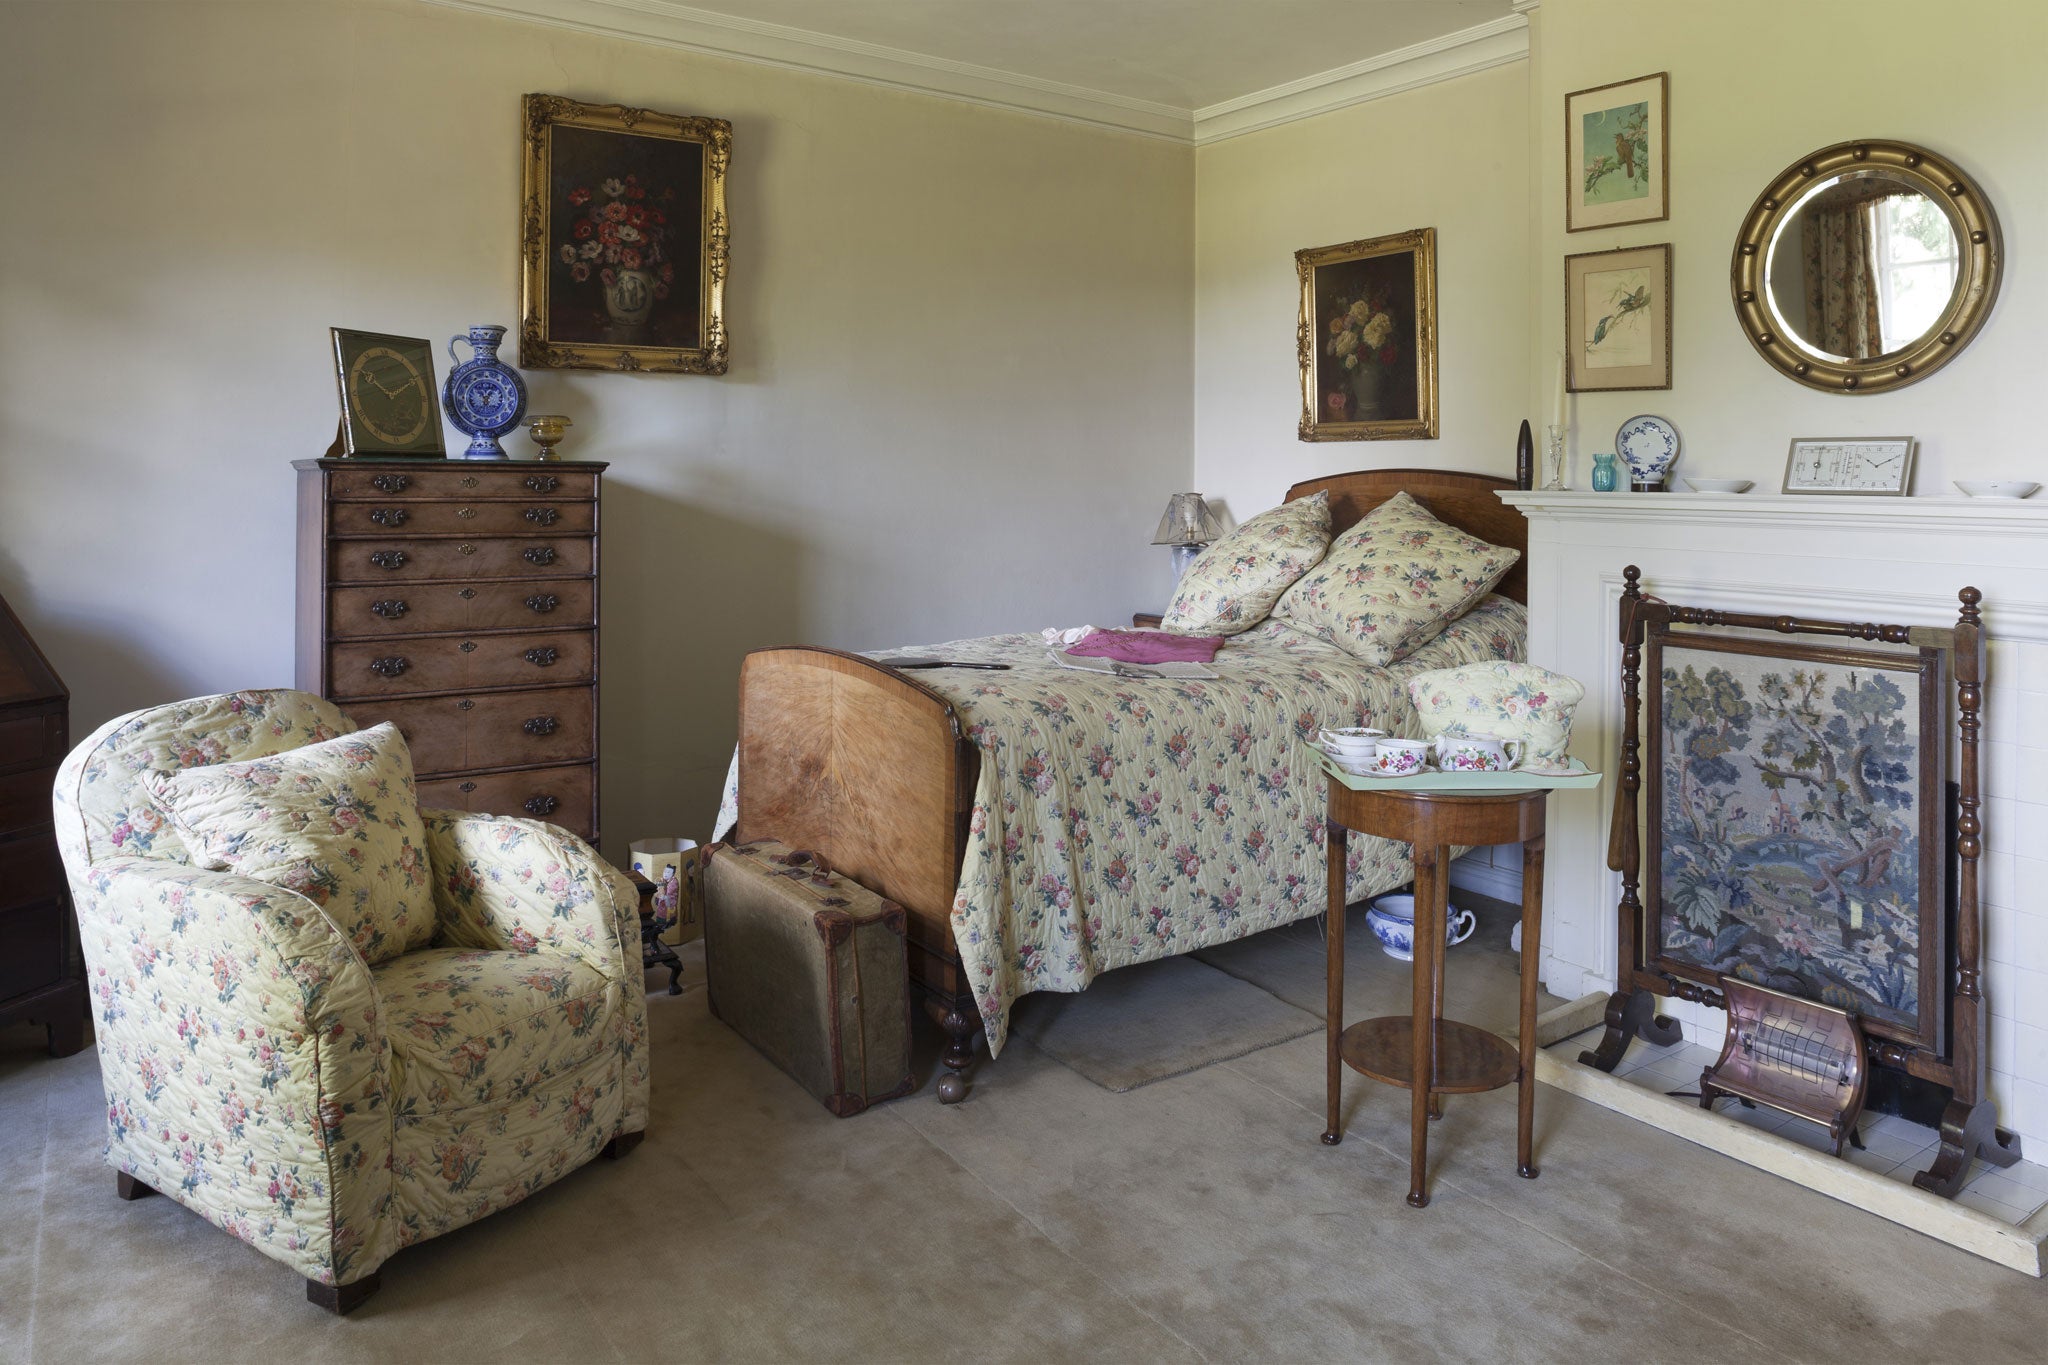 A guest bedroom at the house built by Lutyens' pupil Oswald Partridge Milne